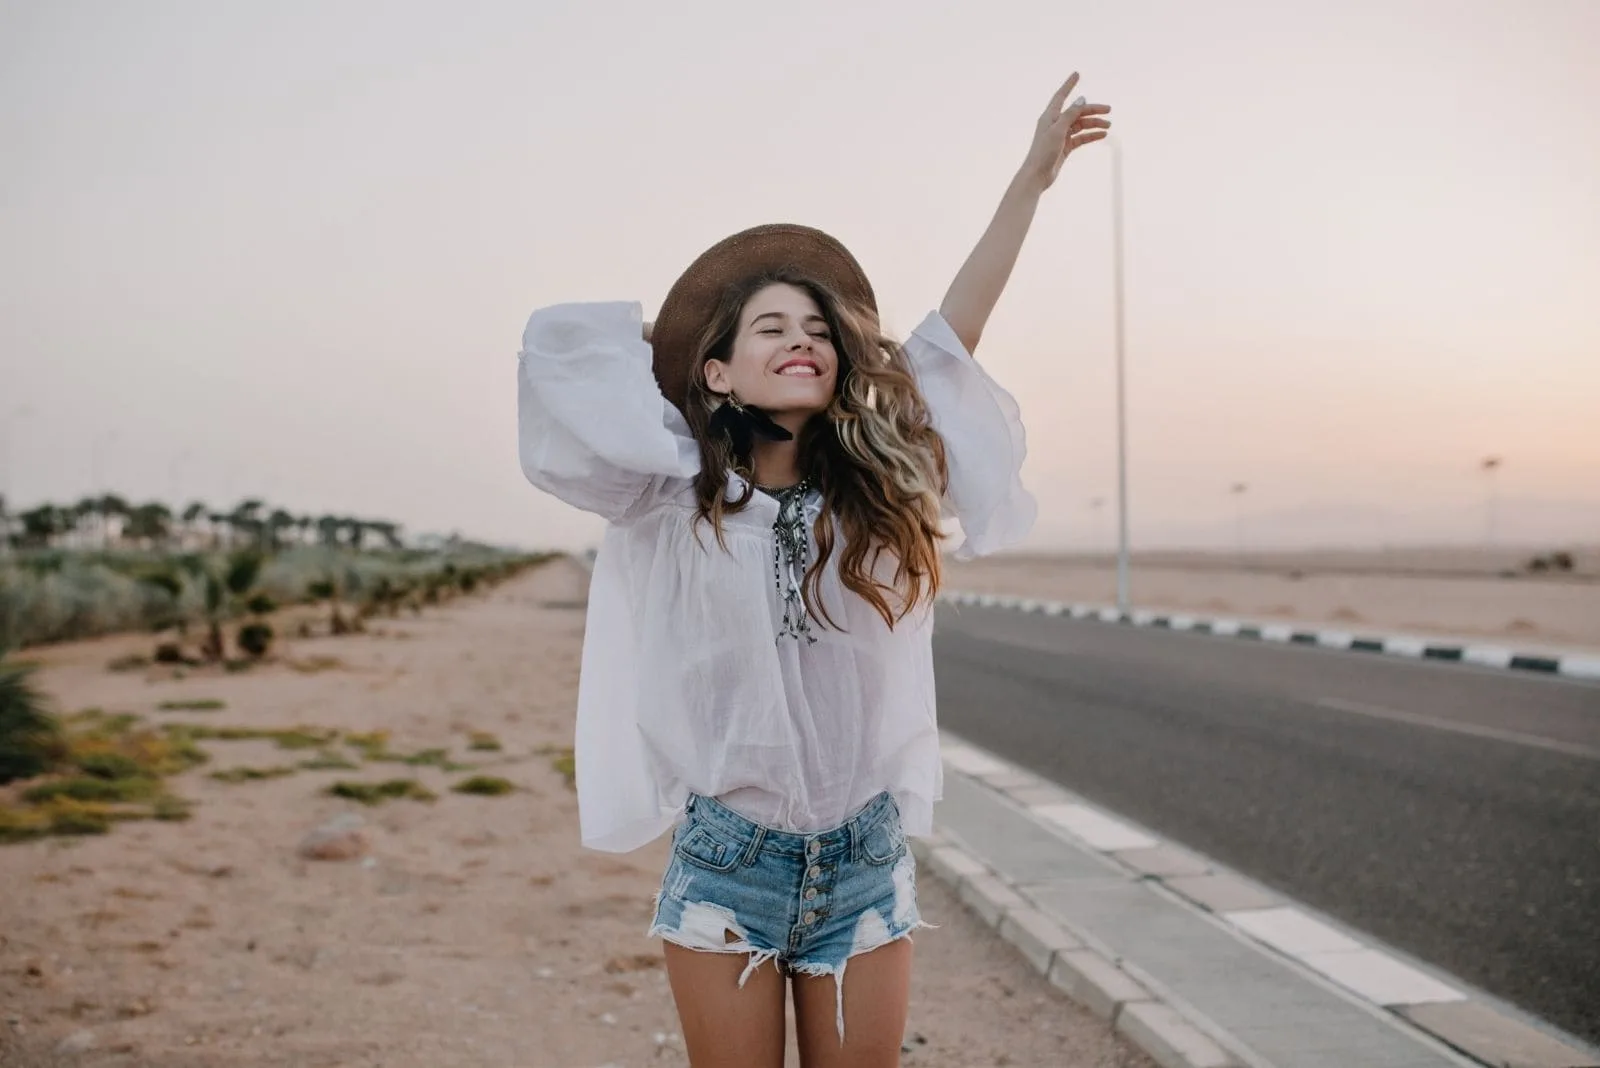 happy woman stands near the street along the highways holding her hat and raising one arm